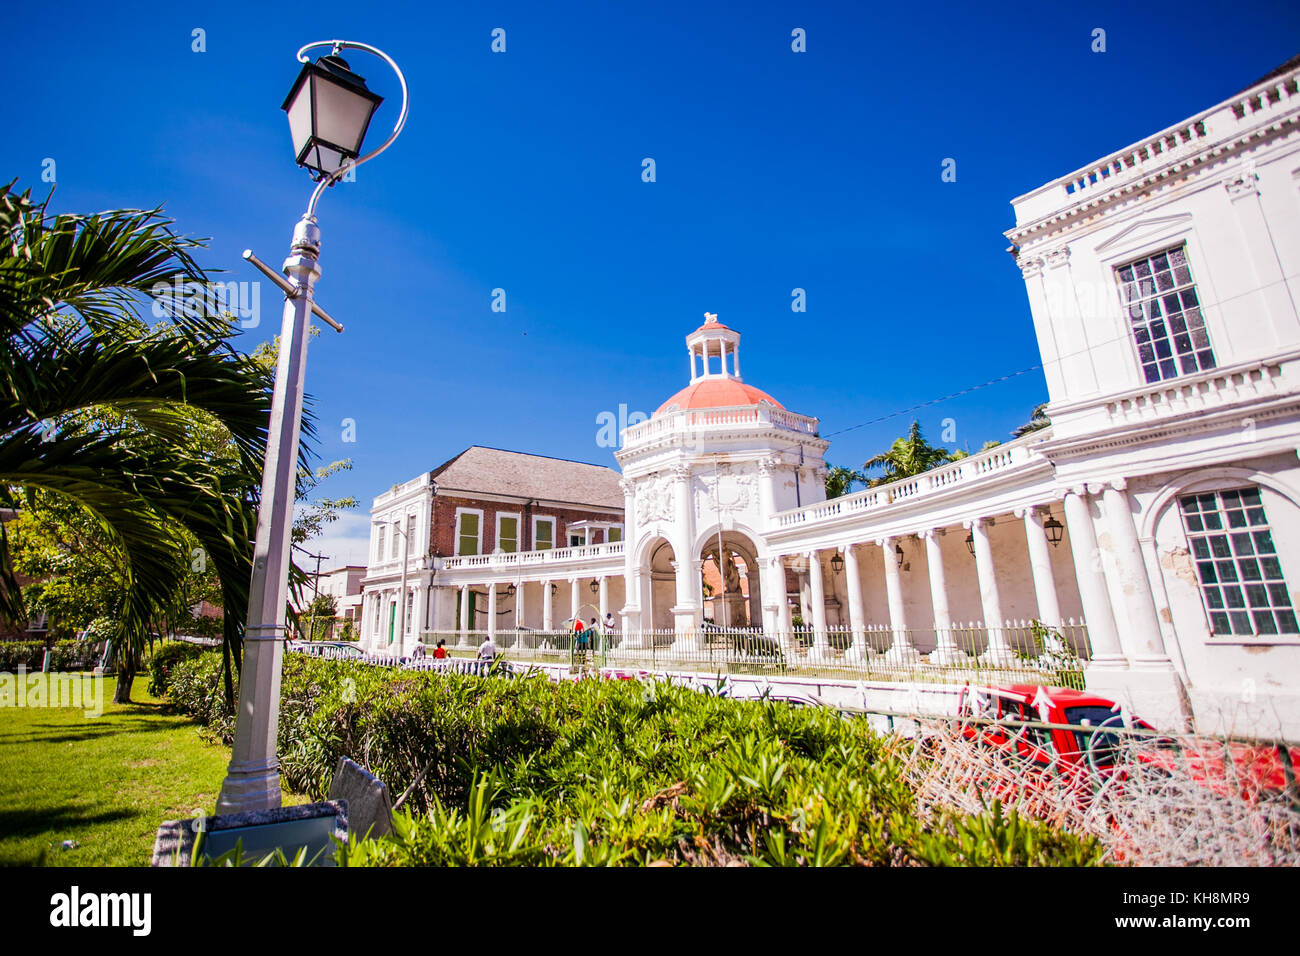 Old Spanish town in Jamaica Stock Photo